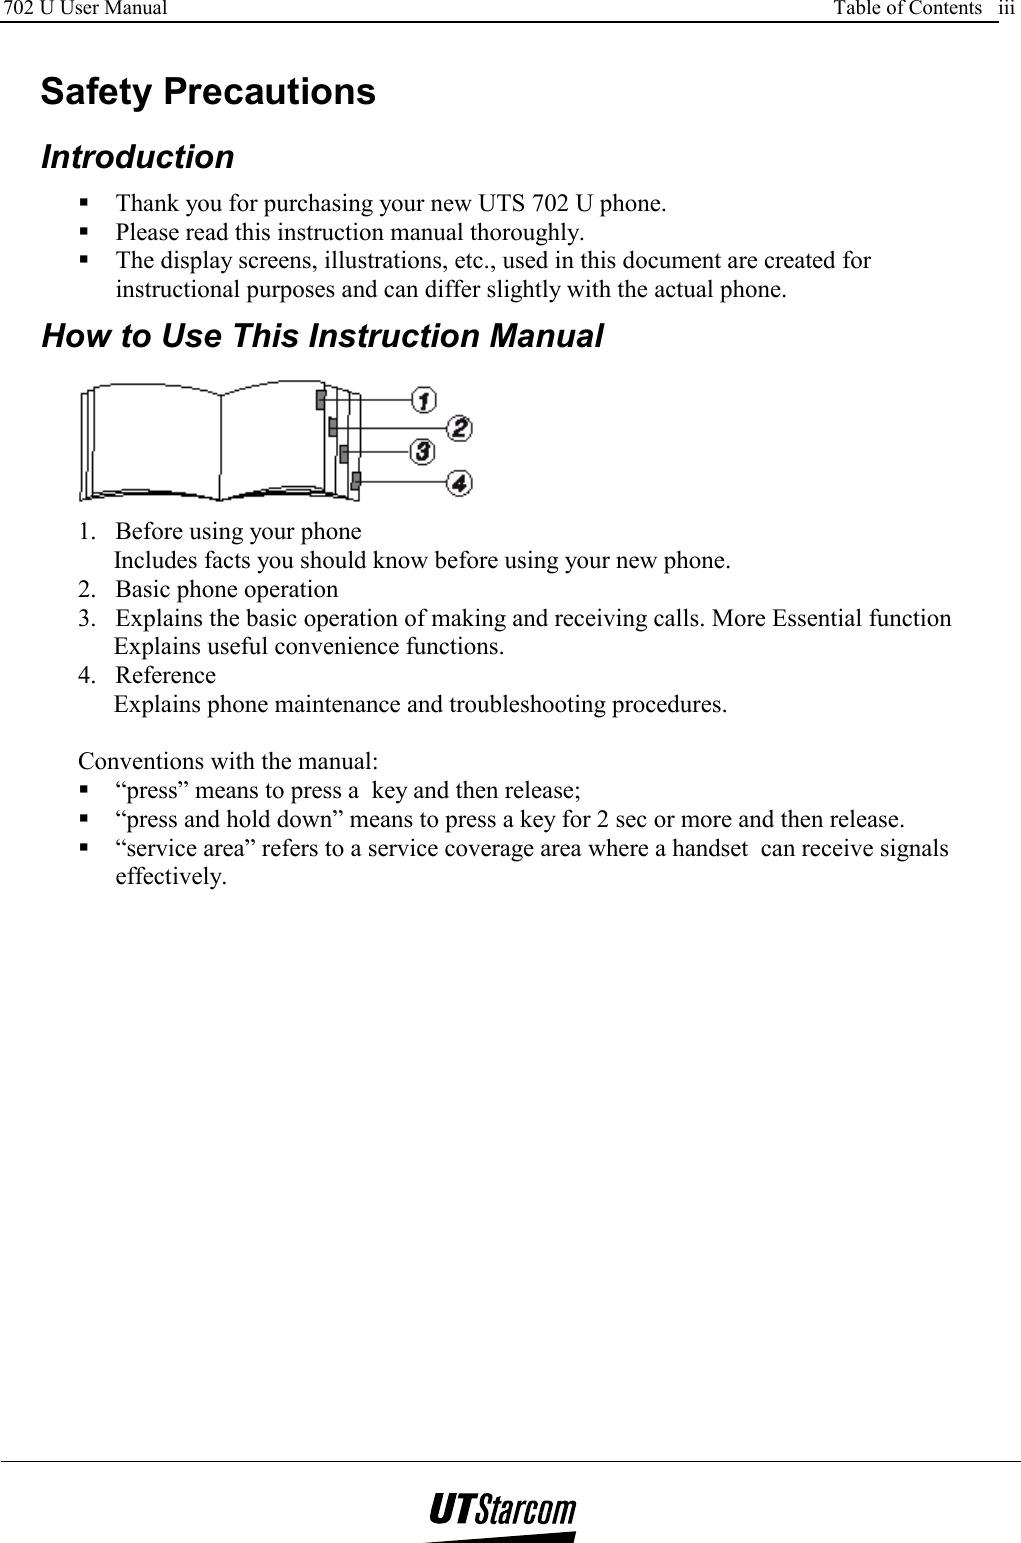 702 U User Manual      Table of Contents   iii     Safety Precautions  Introduction  Thank you for purchasing your new UTS 702 U phone.  Please read this instruction manual thoroughly.  The display screens, illustrations, etc., used in this document are created for instructional purposes and can differ slightly with the actual phone.    How to Use This Instruction Manual  1.  Before using your phone Includes facts you should know before using your new phone. 2.  Basic phone operation 3.  Explains the basic operation of making and receiving calls. More Essential function Explains useful convenience functions. 4. Reference Explains phone maintenance and troubleshooting procedures.  Conventions with the manual:  “press” means to press a  key and then release;  “press and hold down” means to press a key for 2 sec or more and then release.  “service area” refers to a service coverage area where a handset  can receive signals effectively. 